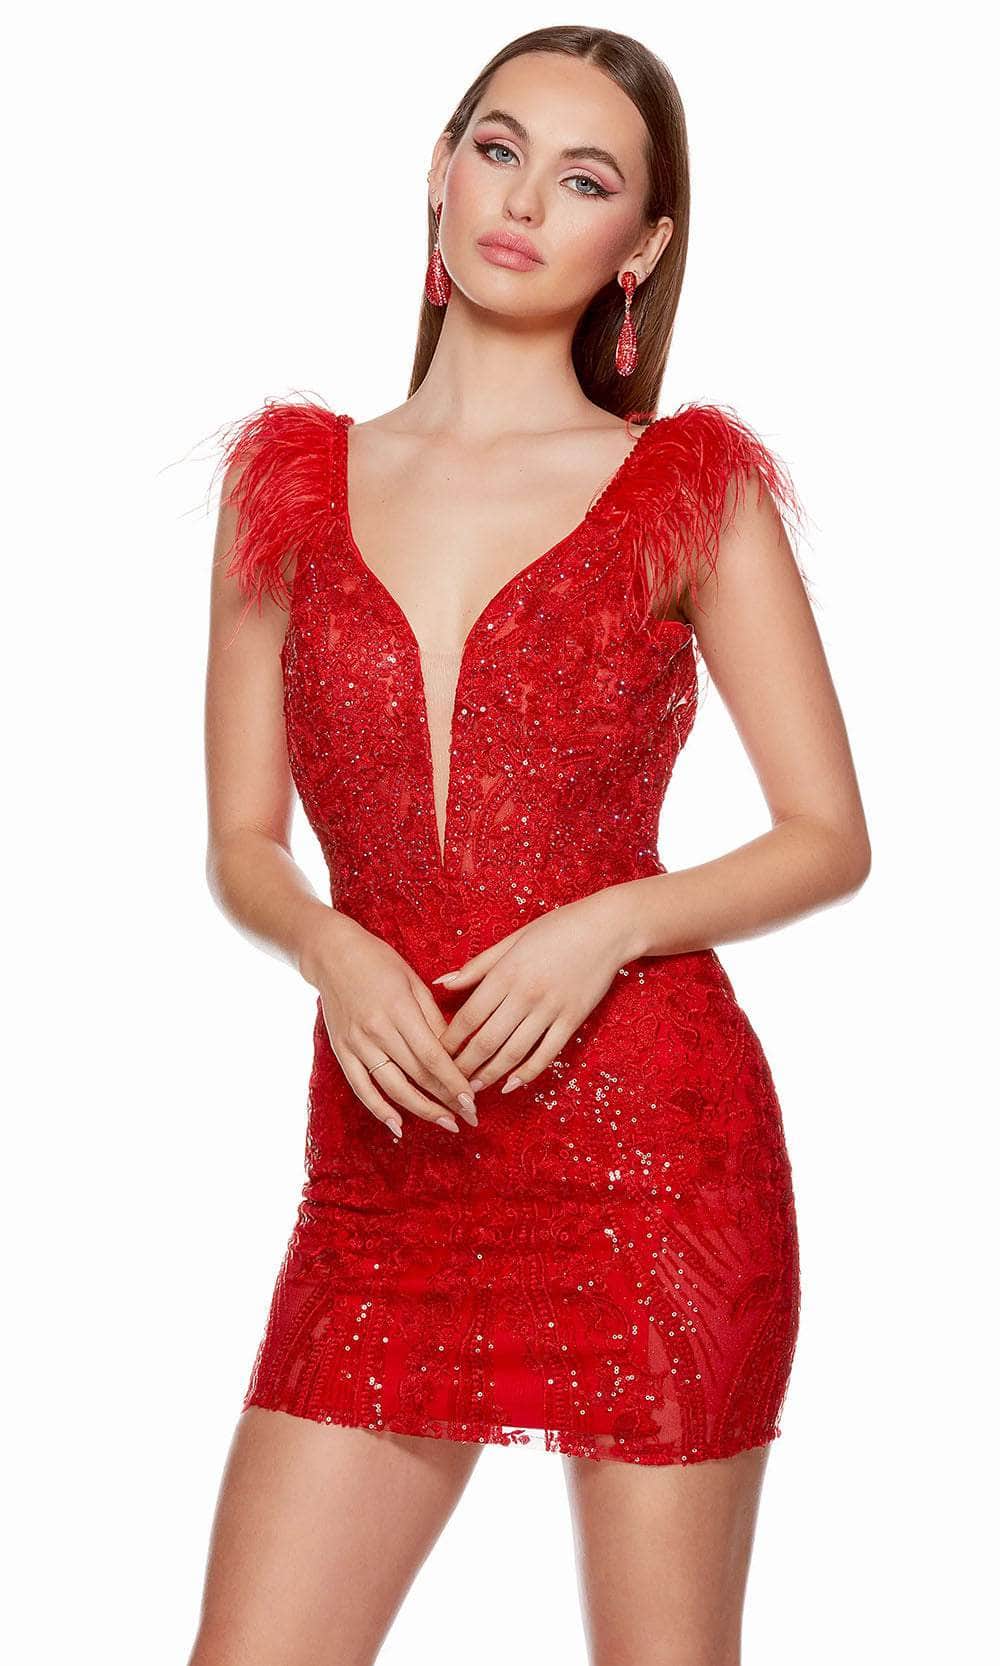 Image of Alyce Paris 4614 - Plunging Lace Homecoming Dress